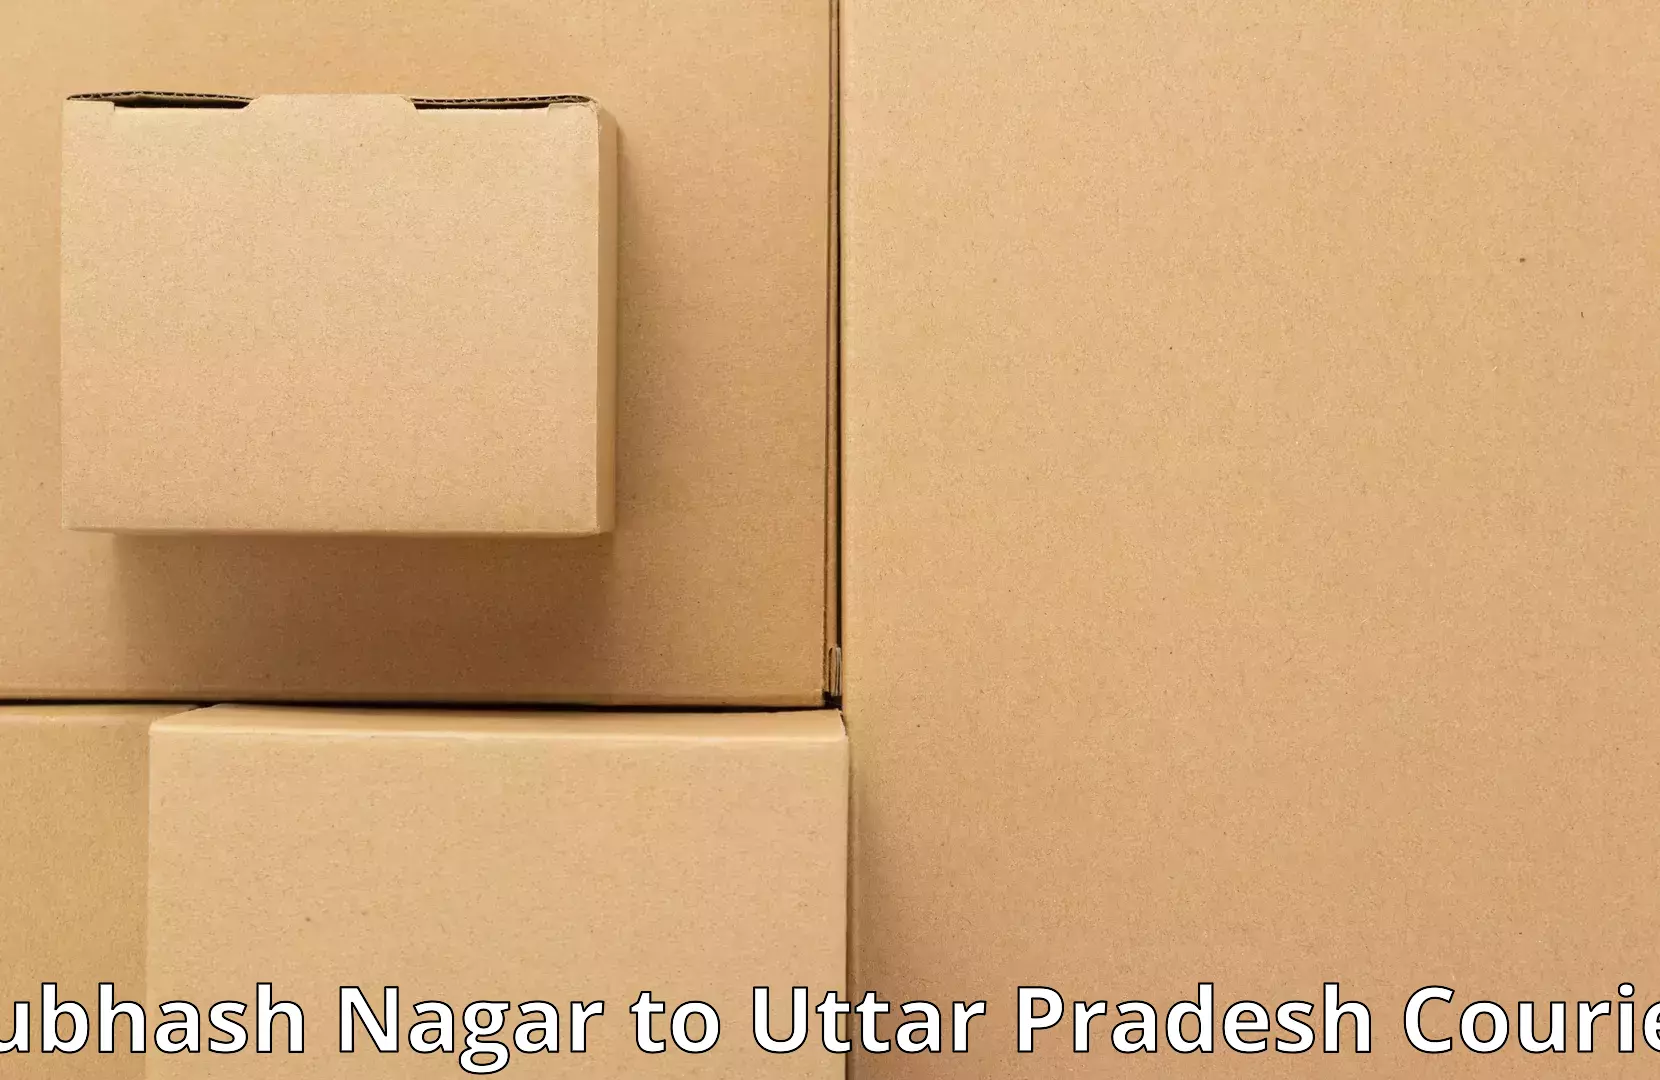 Nationwide household movers Subhash Nagar to Rath